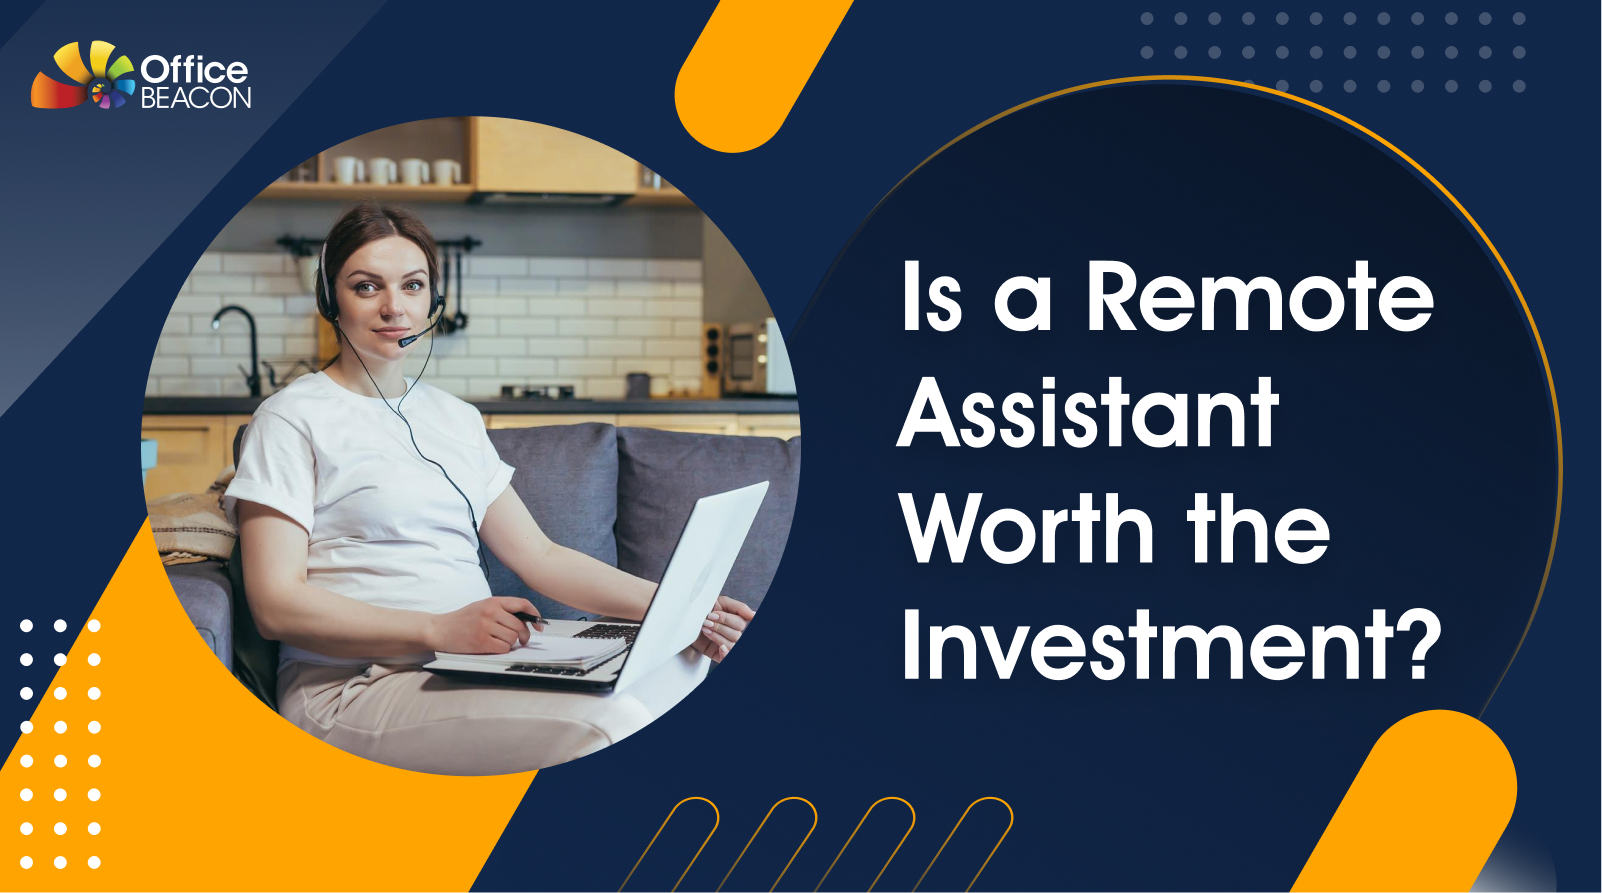 Is a Remote Assistant Worth the Investment?